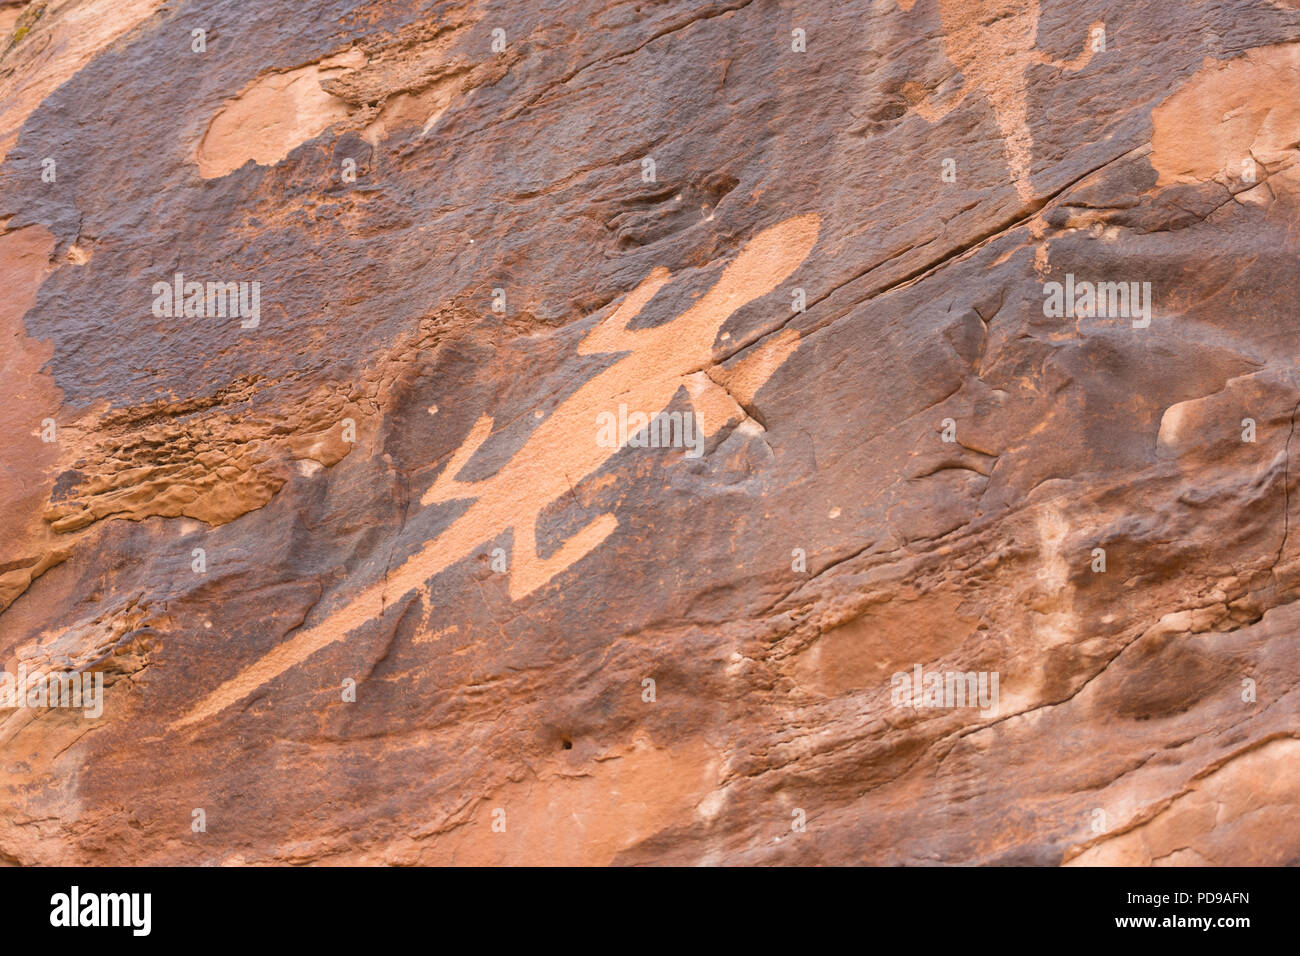 Clean rock carving of lizard on wall Stock Photo